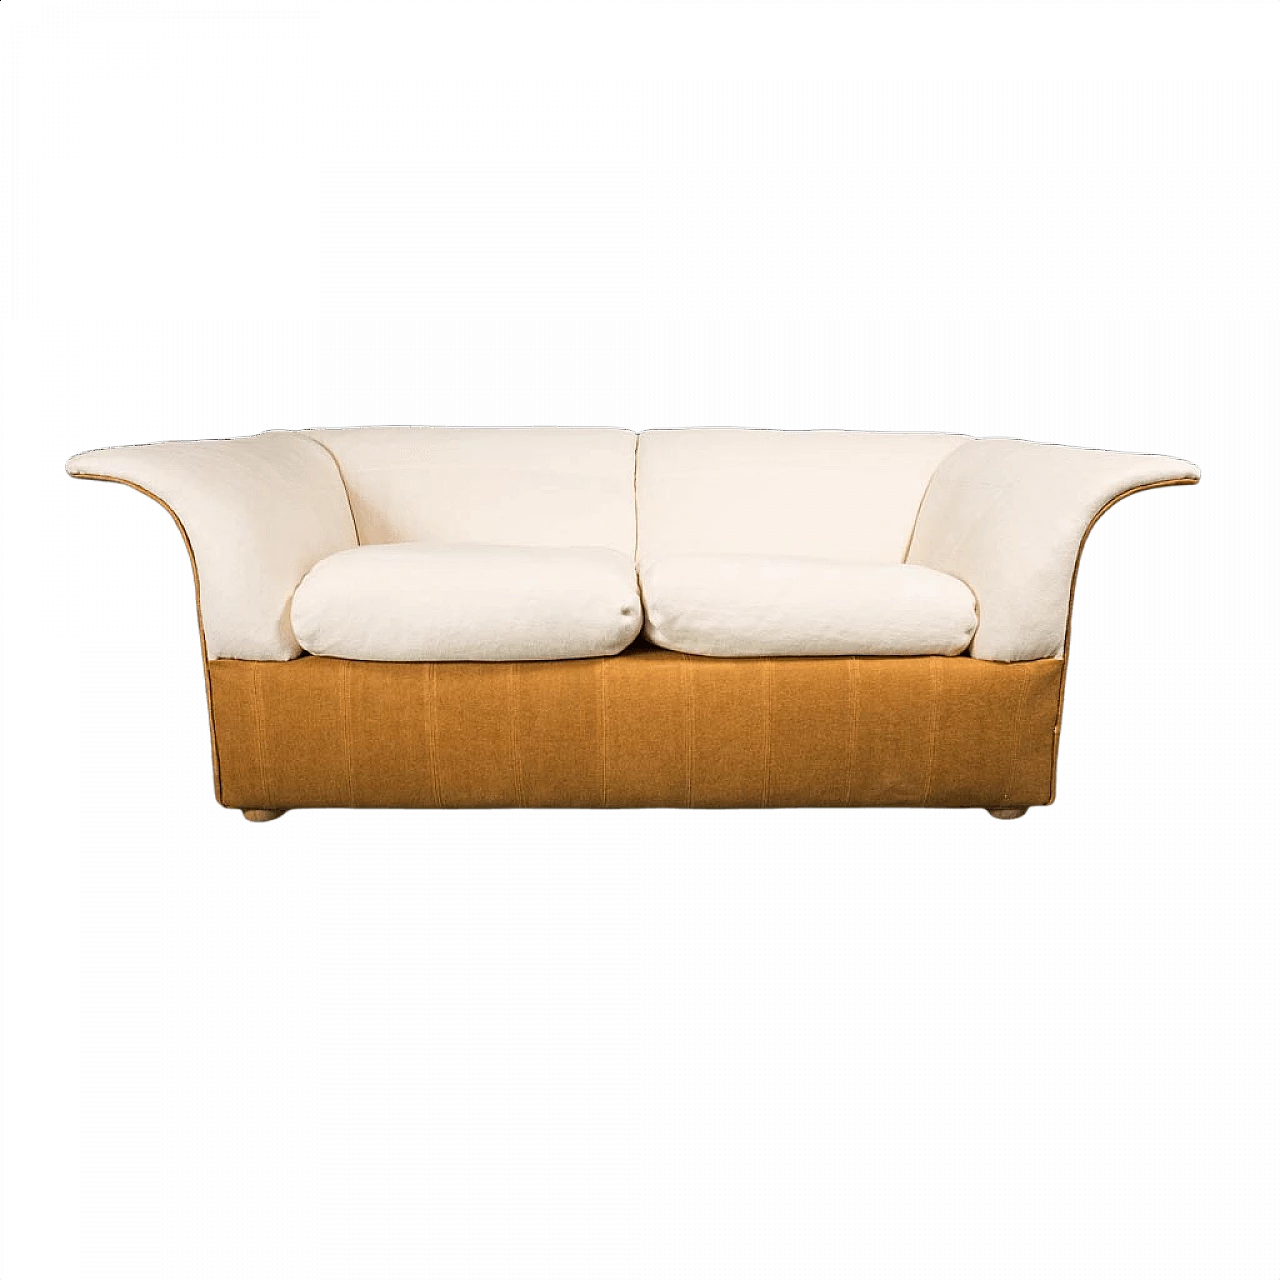 2 Seater sofa in brown and beige linen, 1970s 1374546